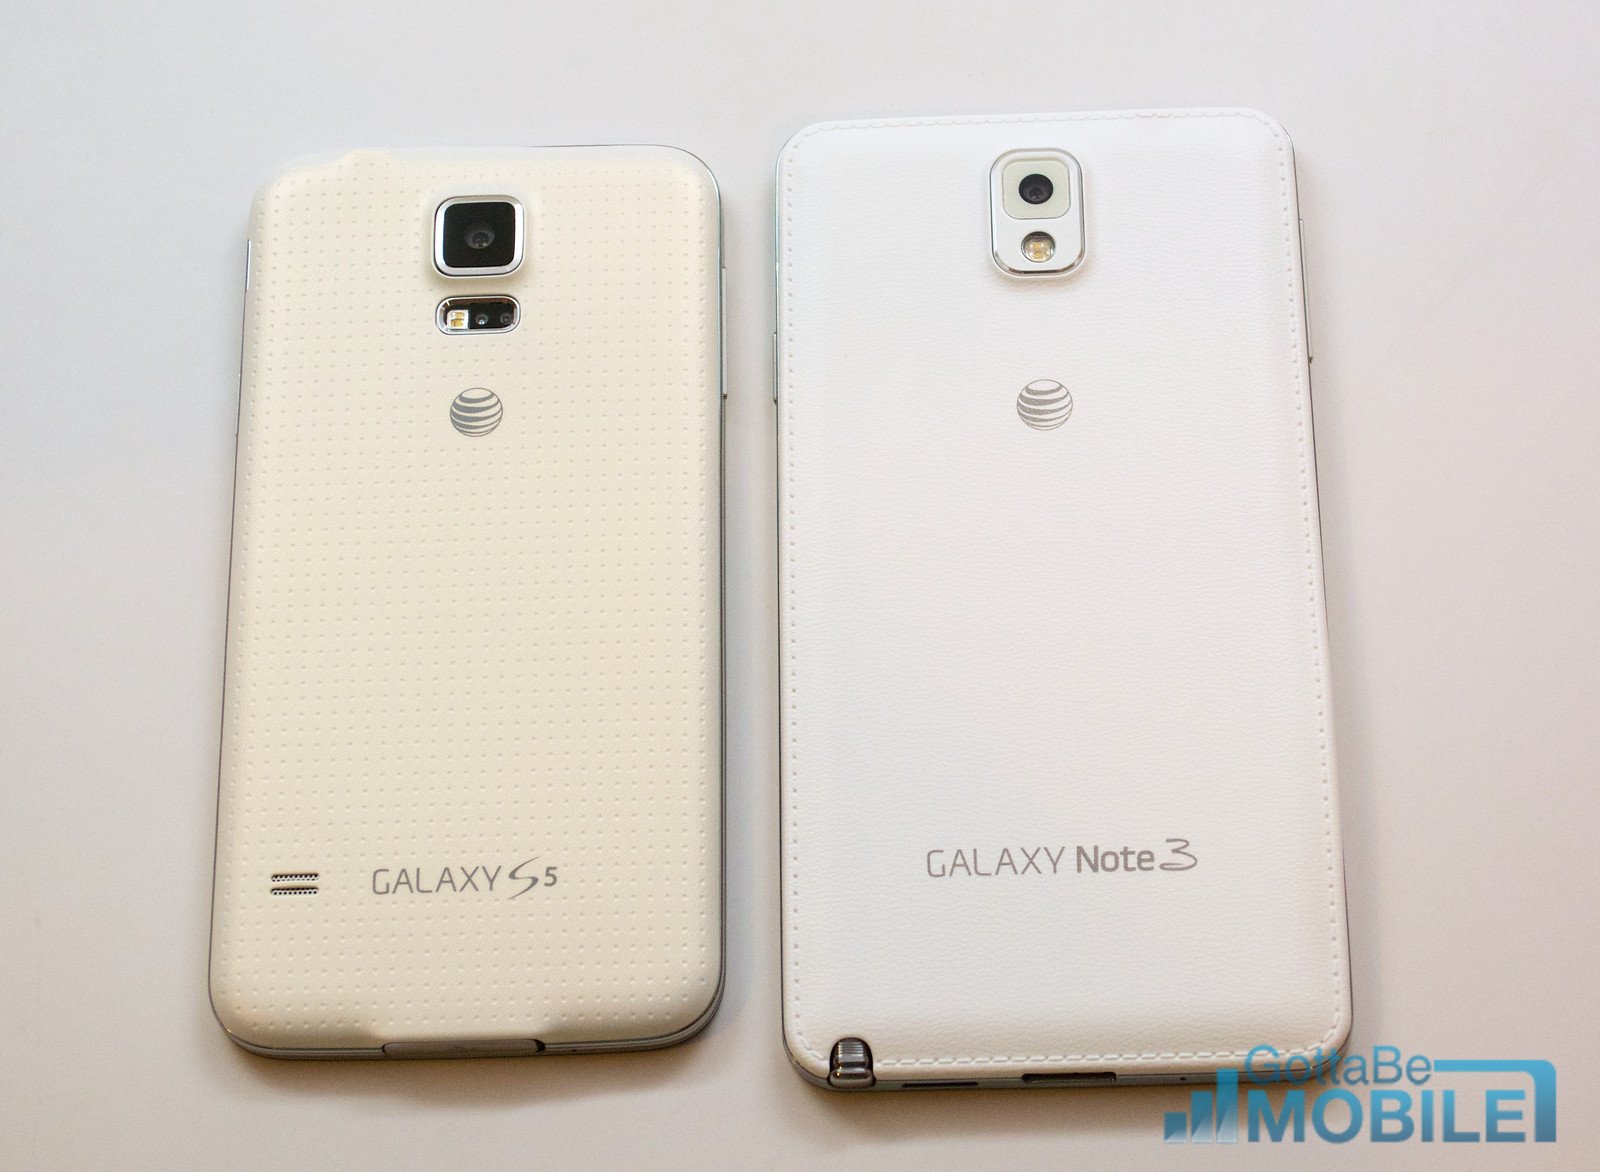 The Galaxy Note 3 leather bak is not as soft, but the white looks much nicer than the off-white of the Galaxy S5.